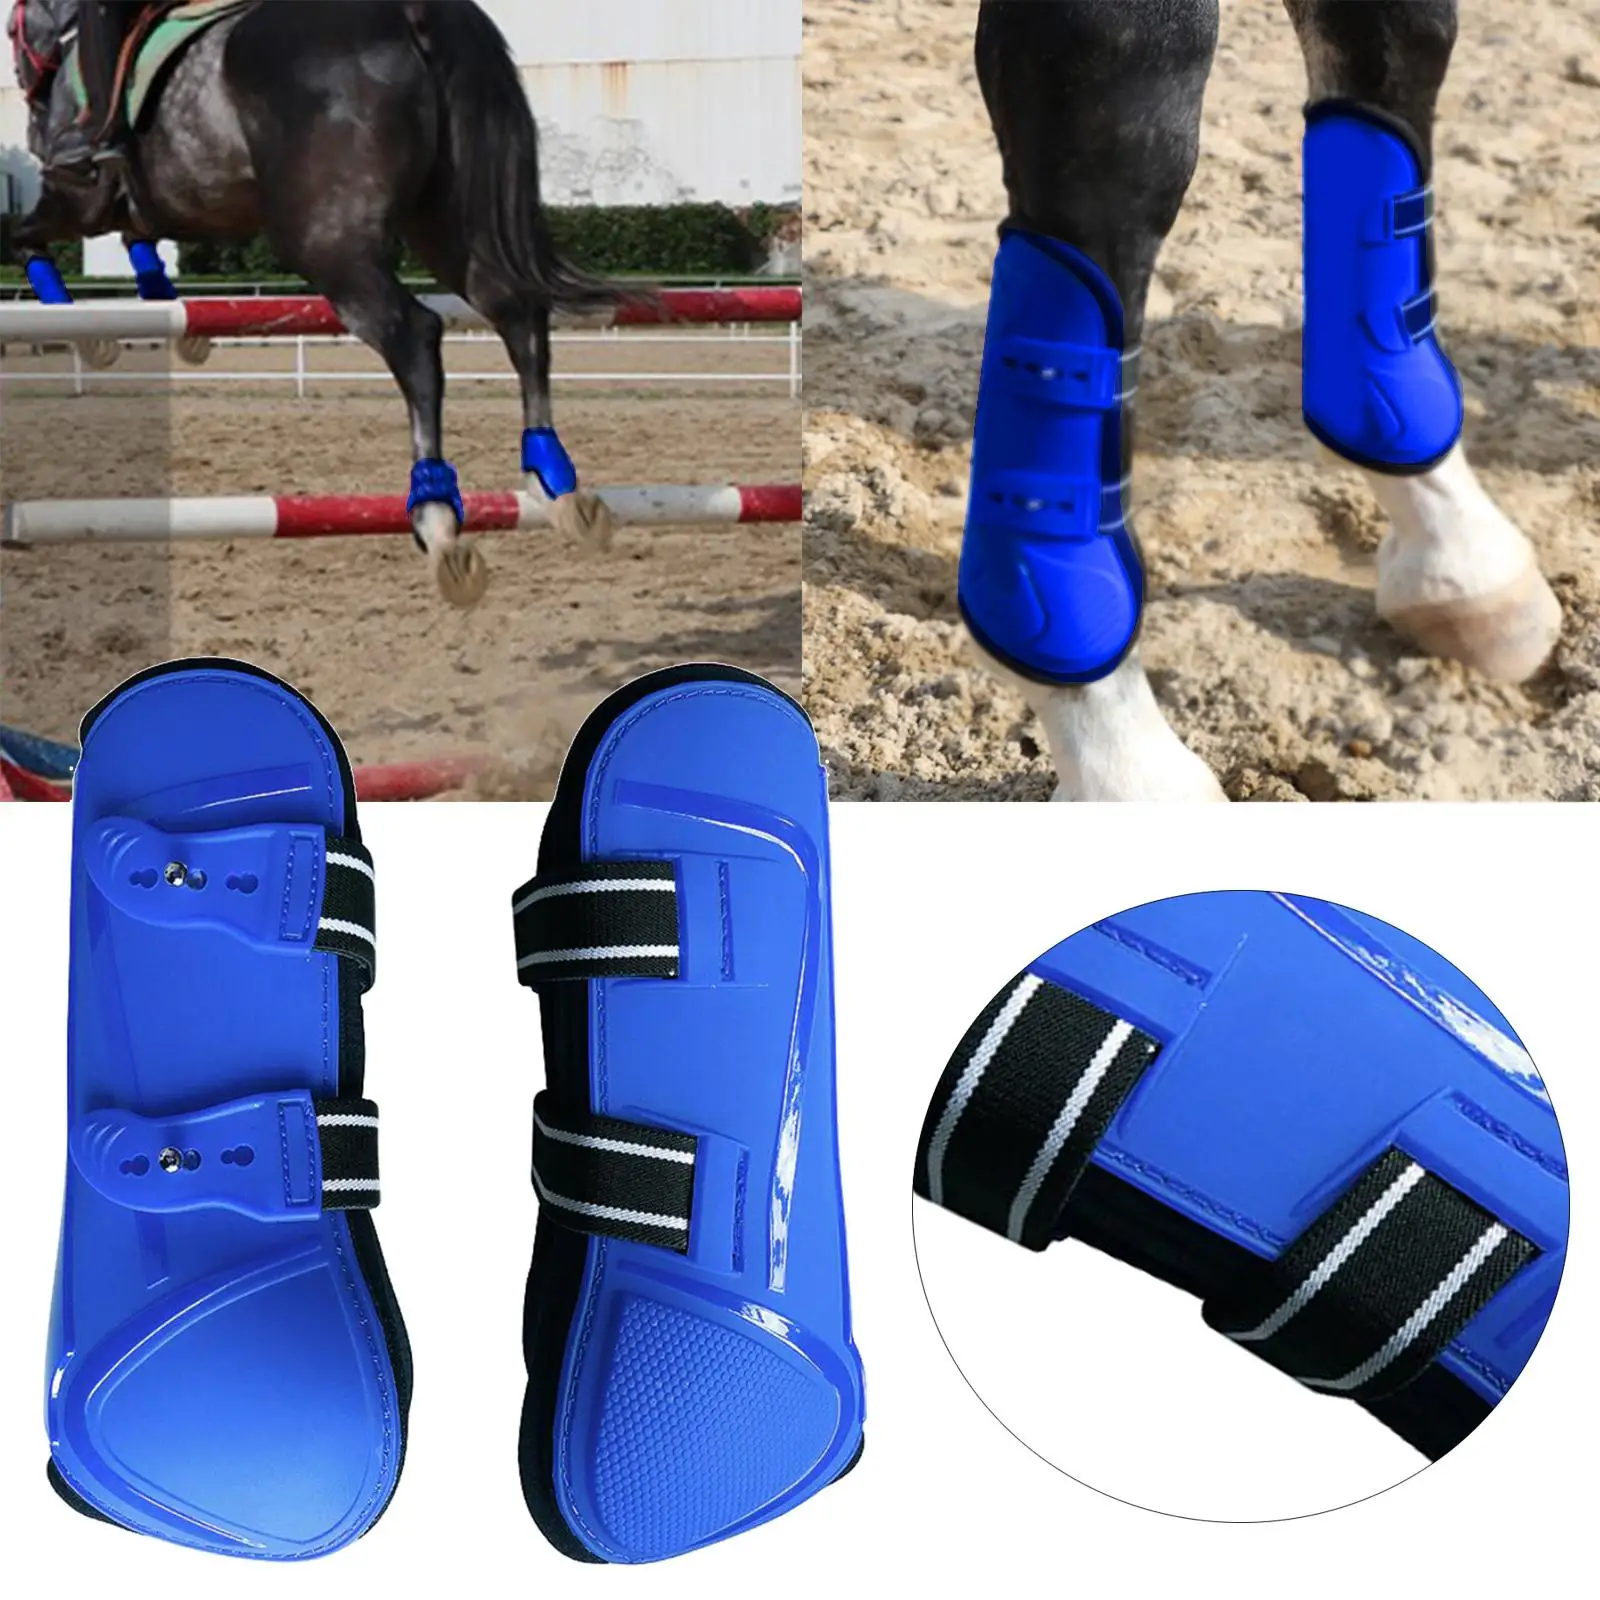 1  Tendon Boots, Adjustable Horse Leg Boots, Shockproof Horse Boots for Riding Jumping Protection Equestrian Equipment